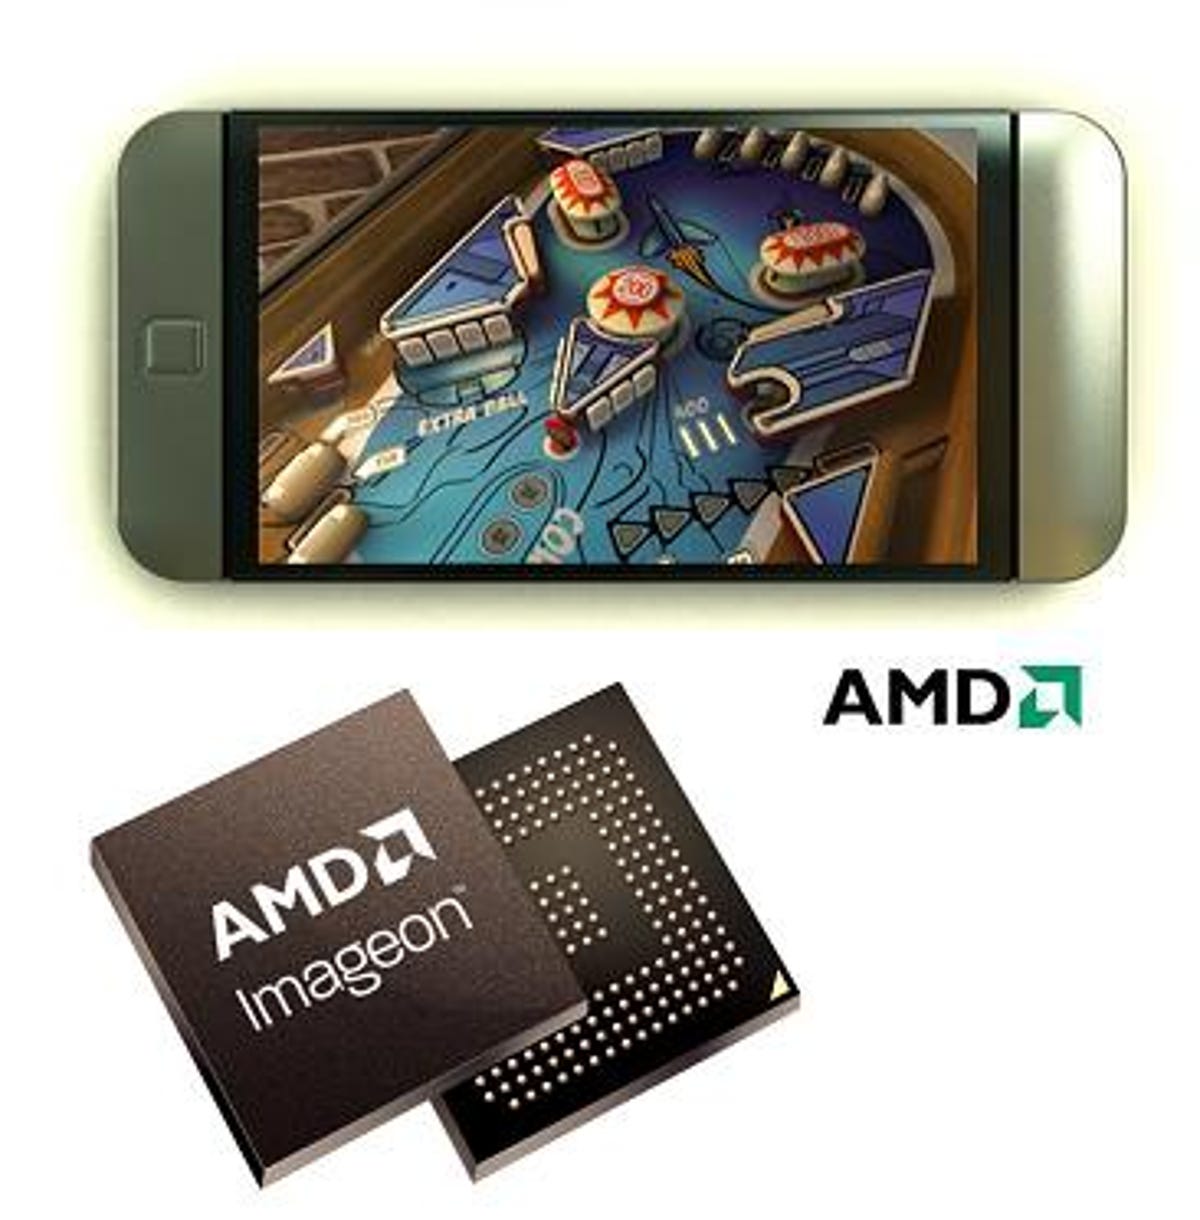 AMD Imageon chip and concept device